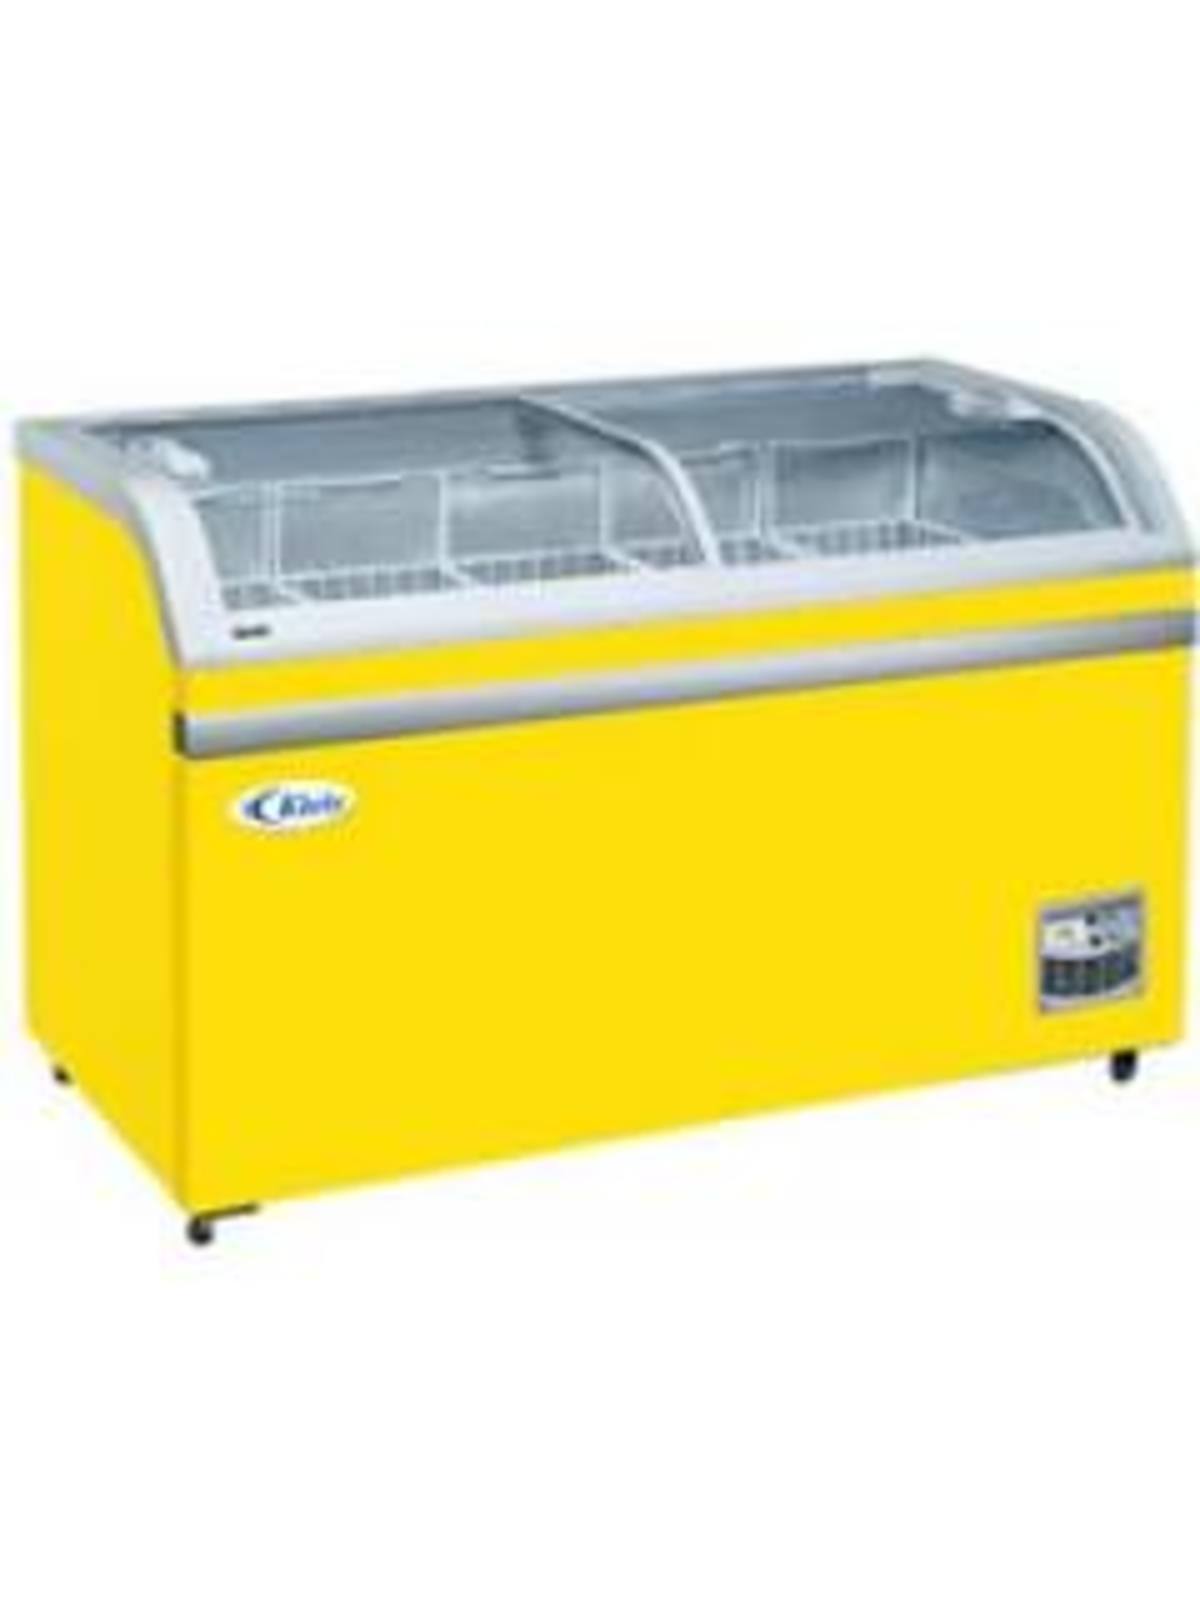 Kieis Ice Cream Freezer 500 Ltr Double Door Refrigerator Price Full Specifications Features 4th Sep 22 At Gadgets Now